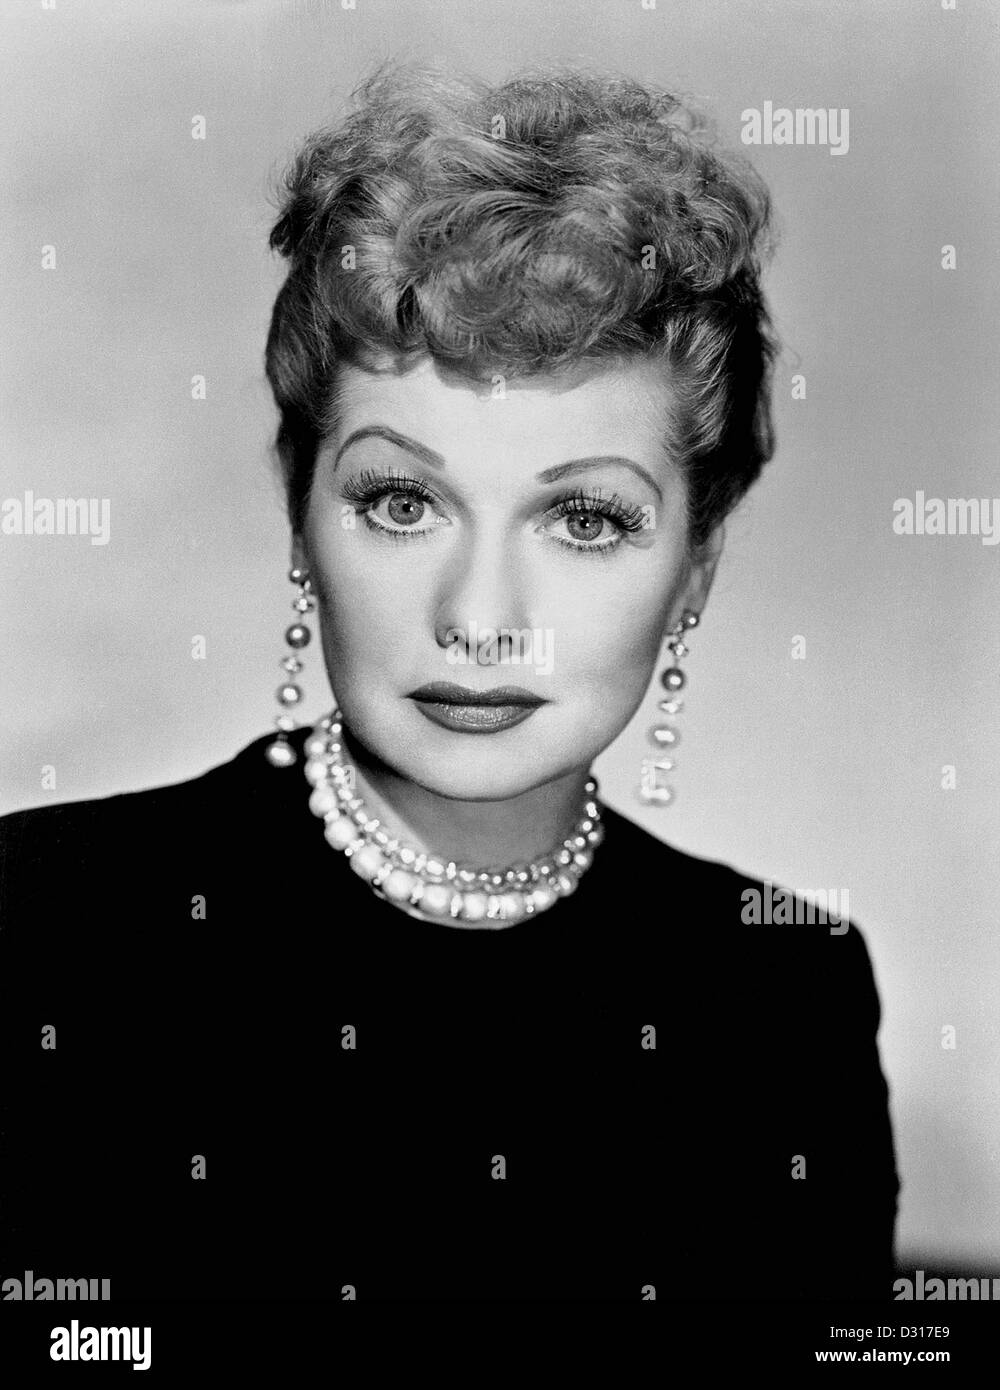 Lucille ball portrait Black and White Stock Photos & Images - Alamy